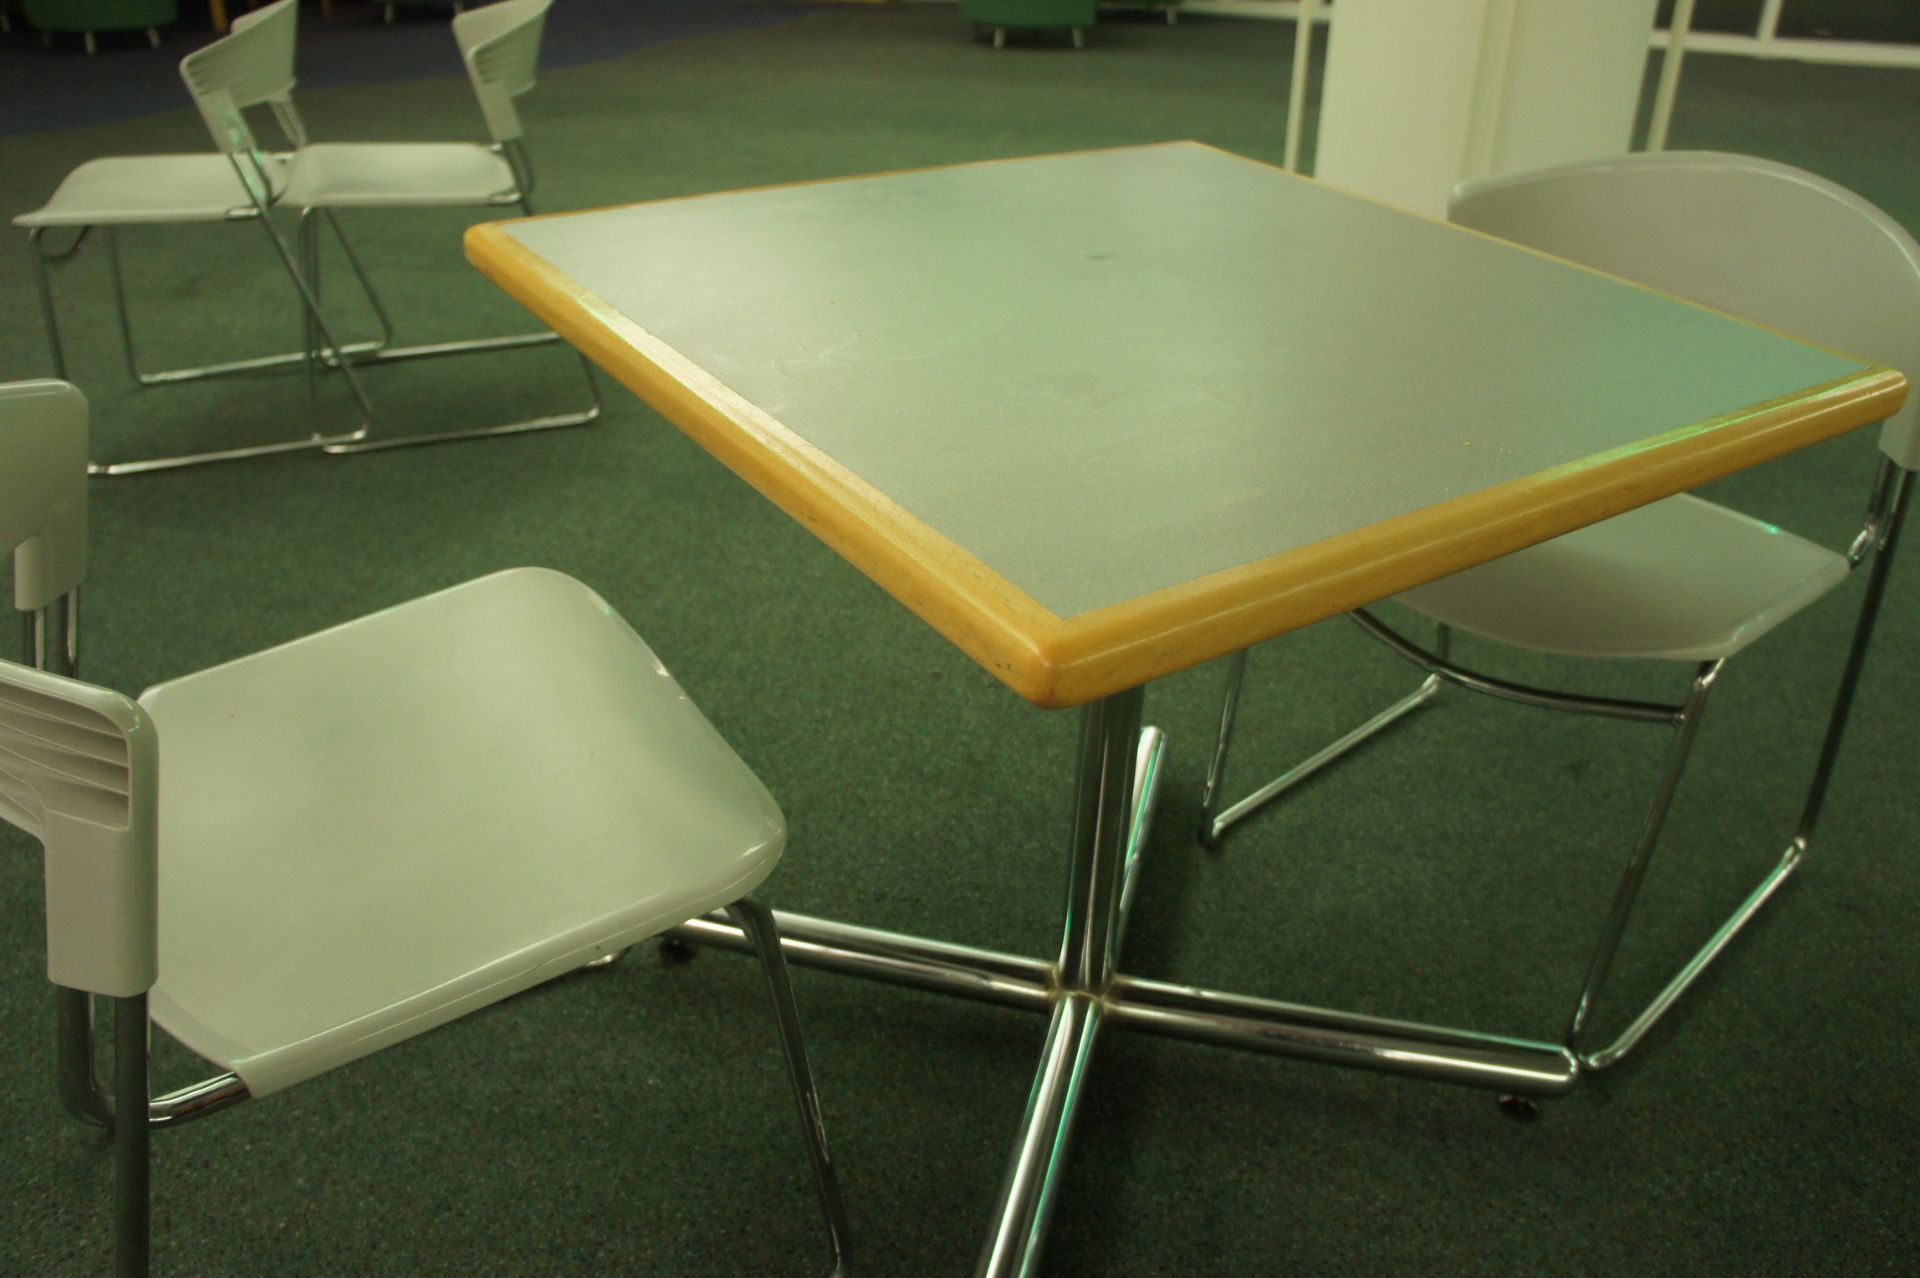 4 x bistro tables with 2 x chairs, 750mm x 750mm